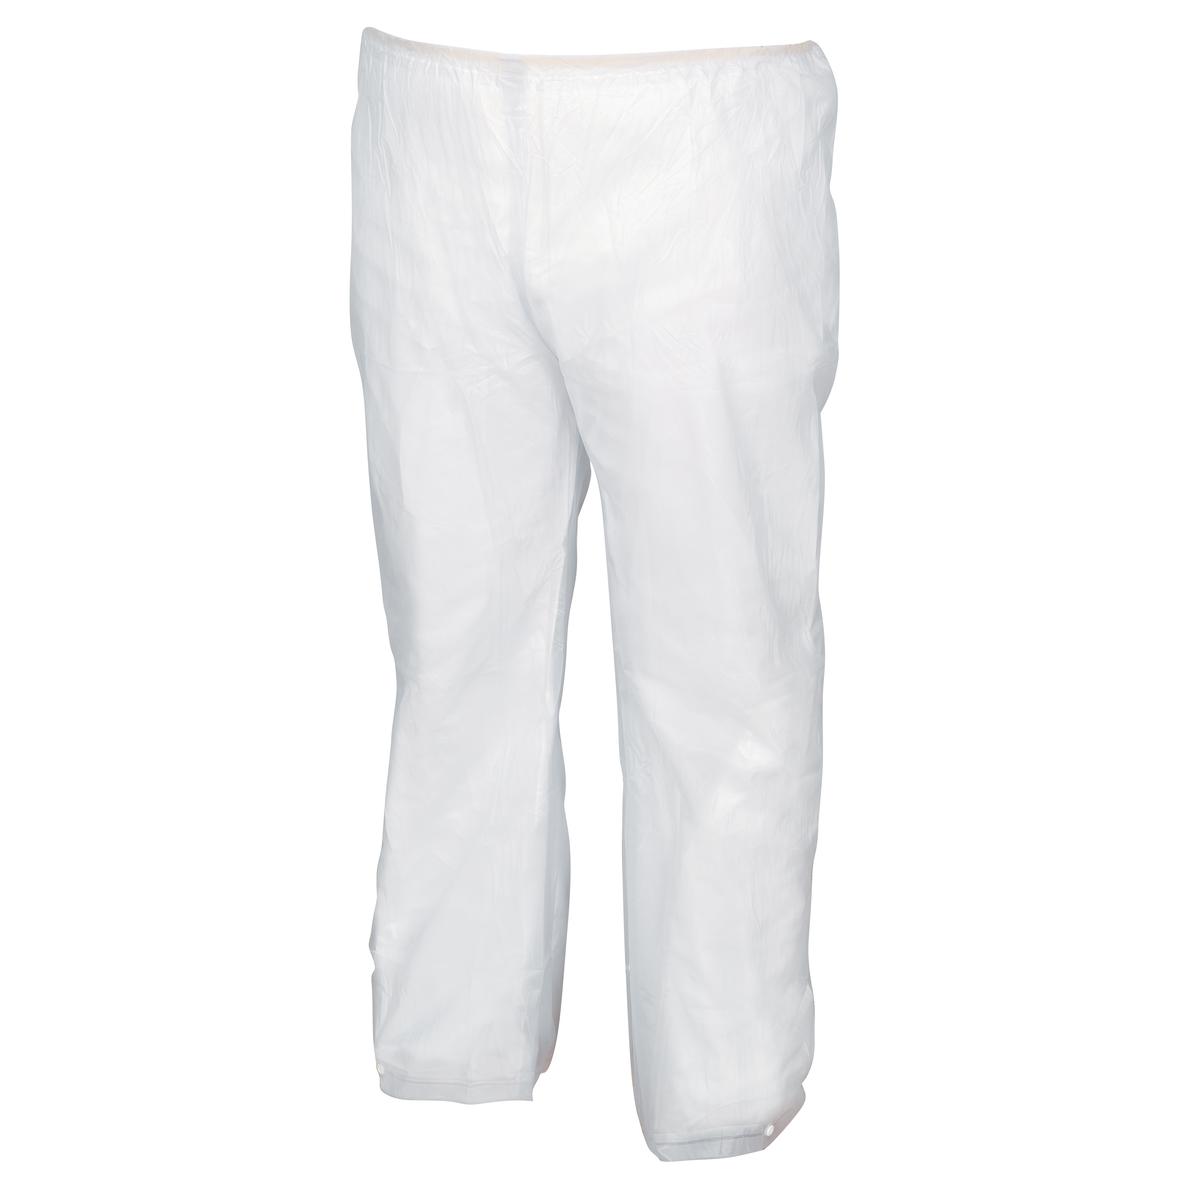 MCR Safety O722 Squall 2-Piece Suit -.20mm PVC Clear Full Source